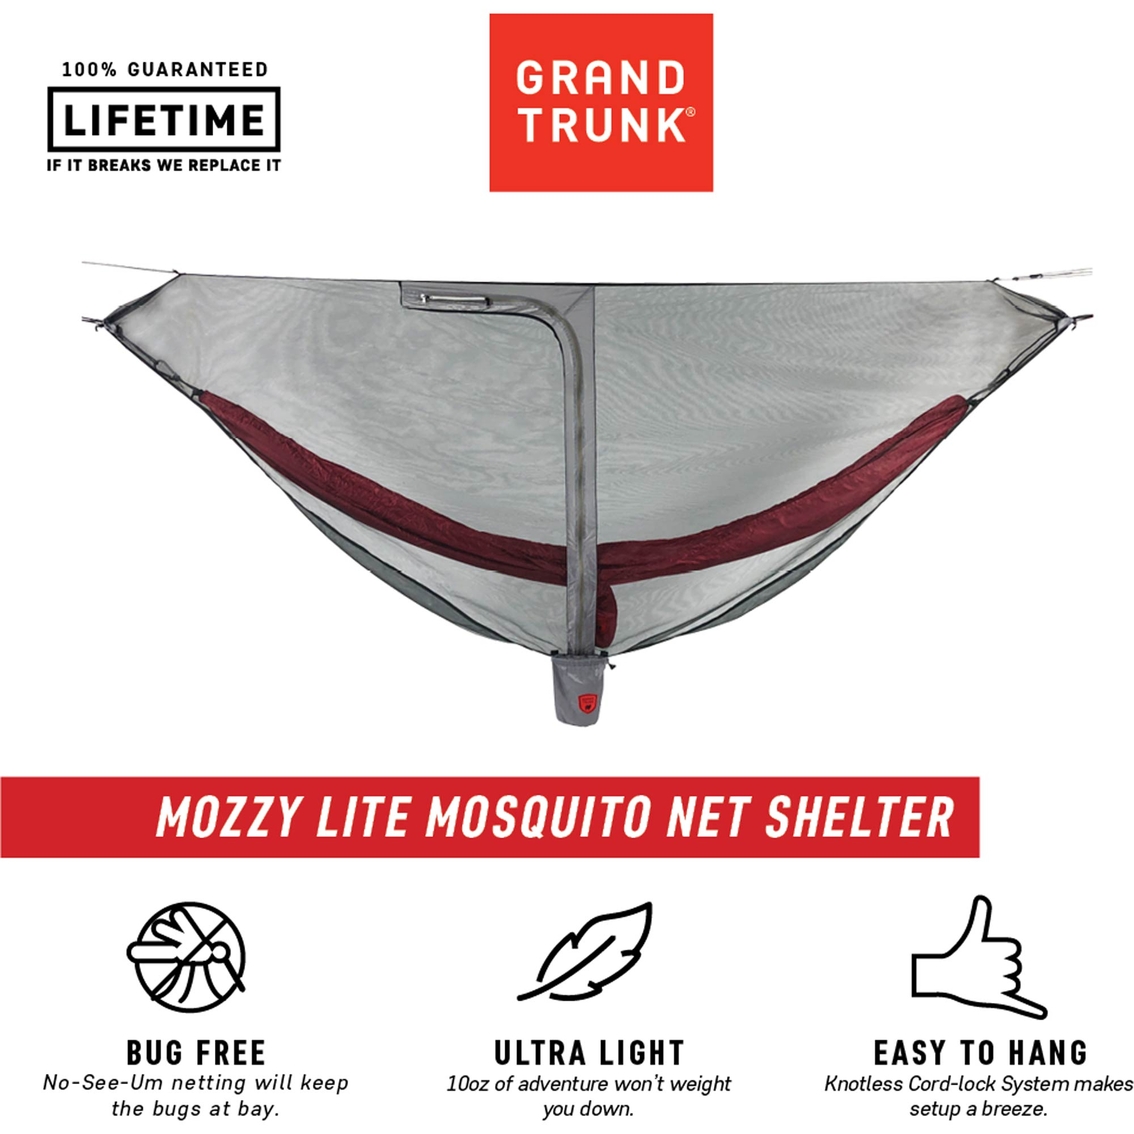 Grand Trunk Mozzy Lite Mosquito Bug Net - Image 5 of 10